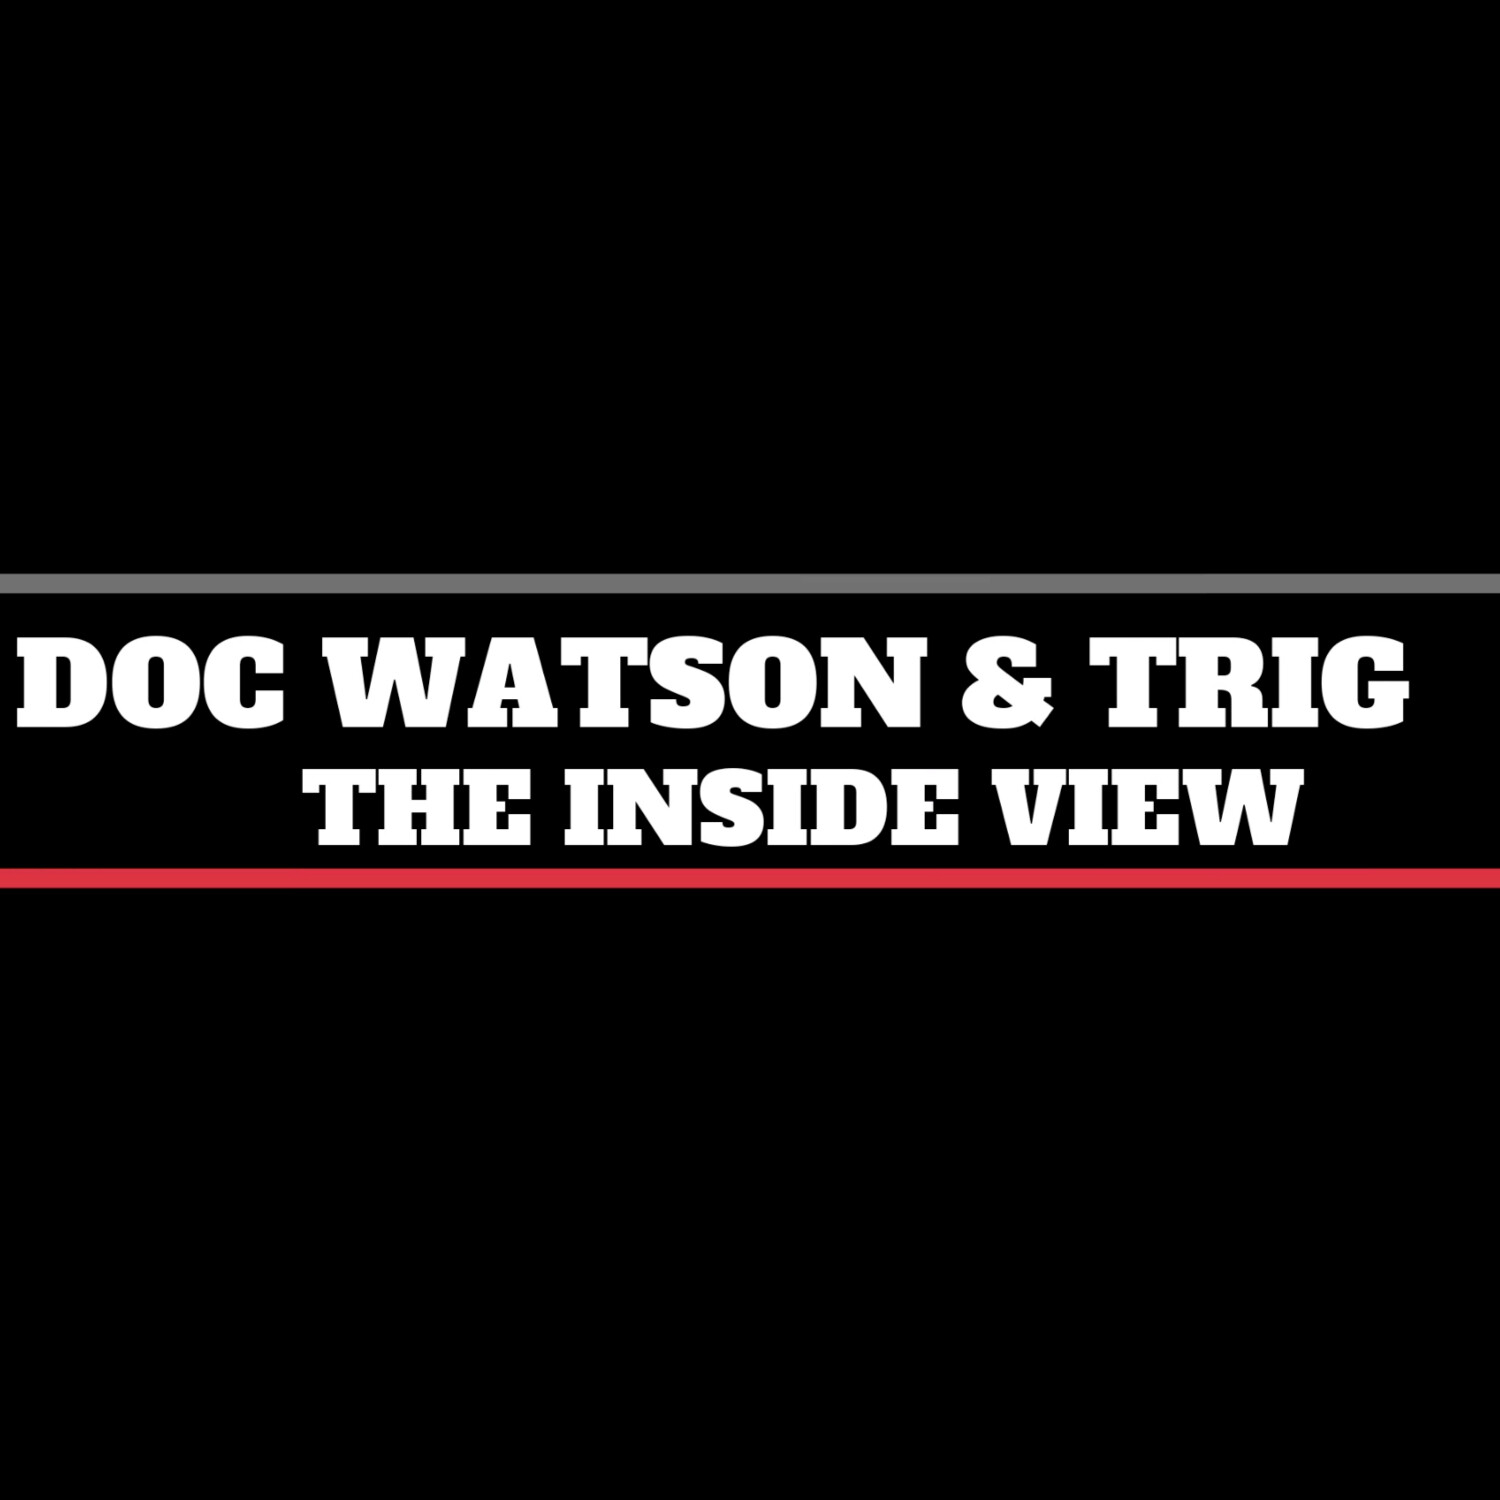 Doc Watson and Trig: The Inside View